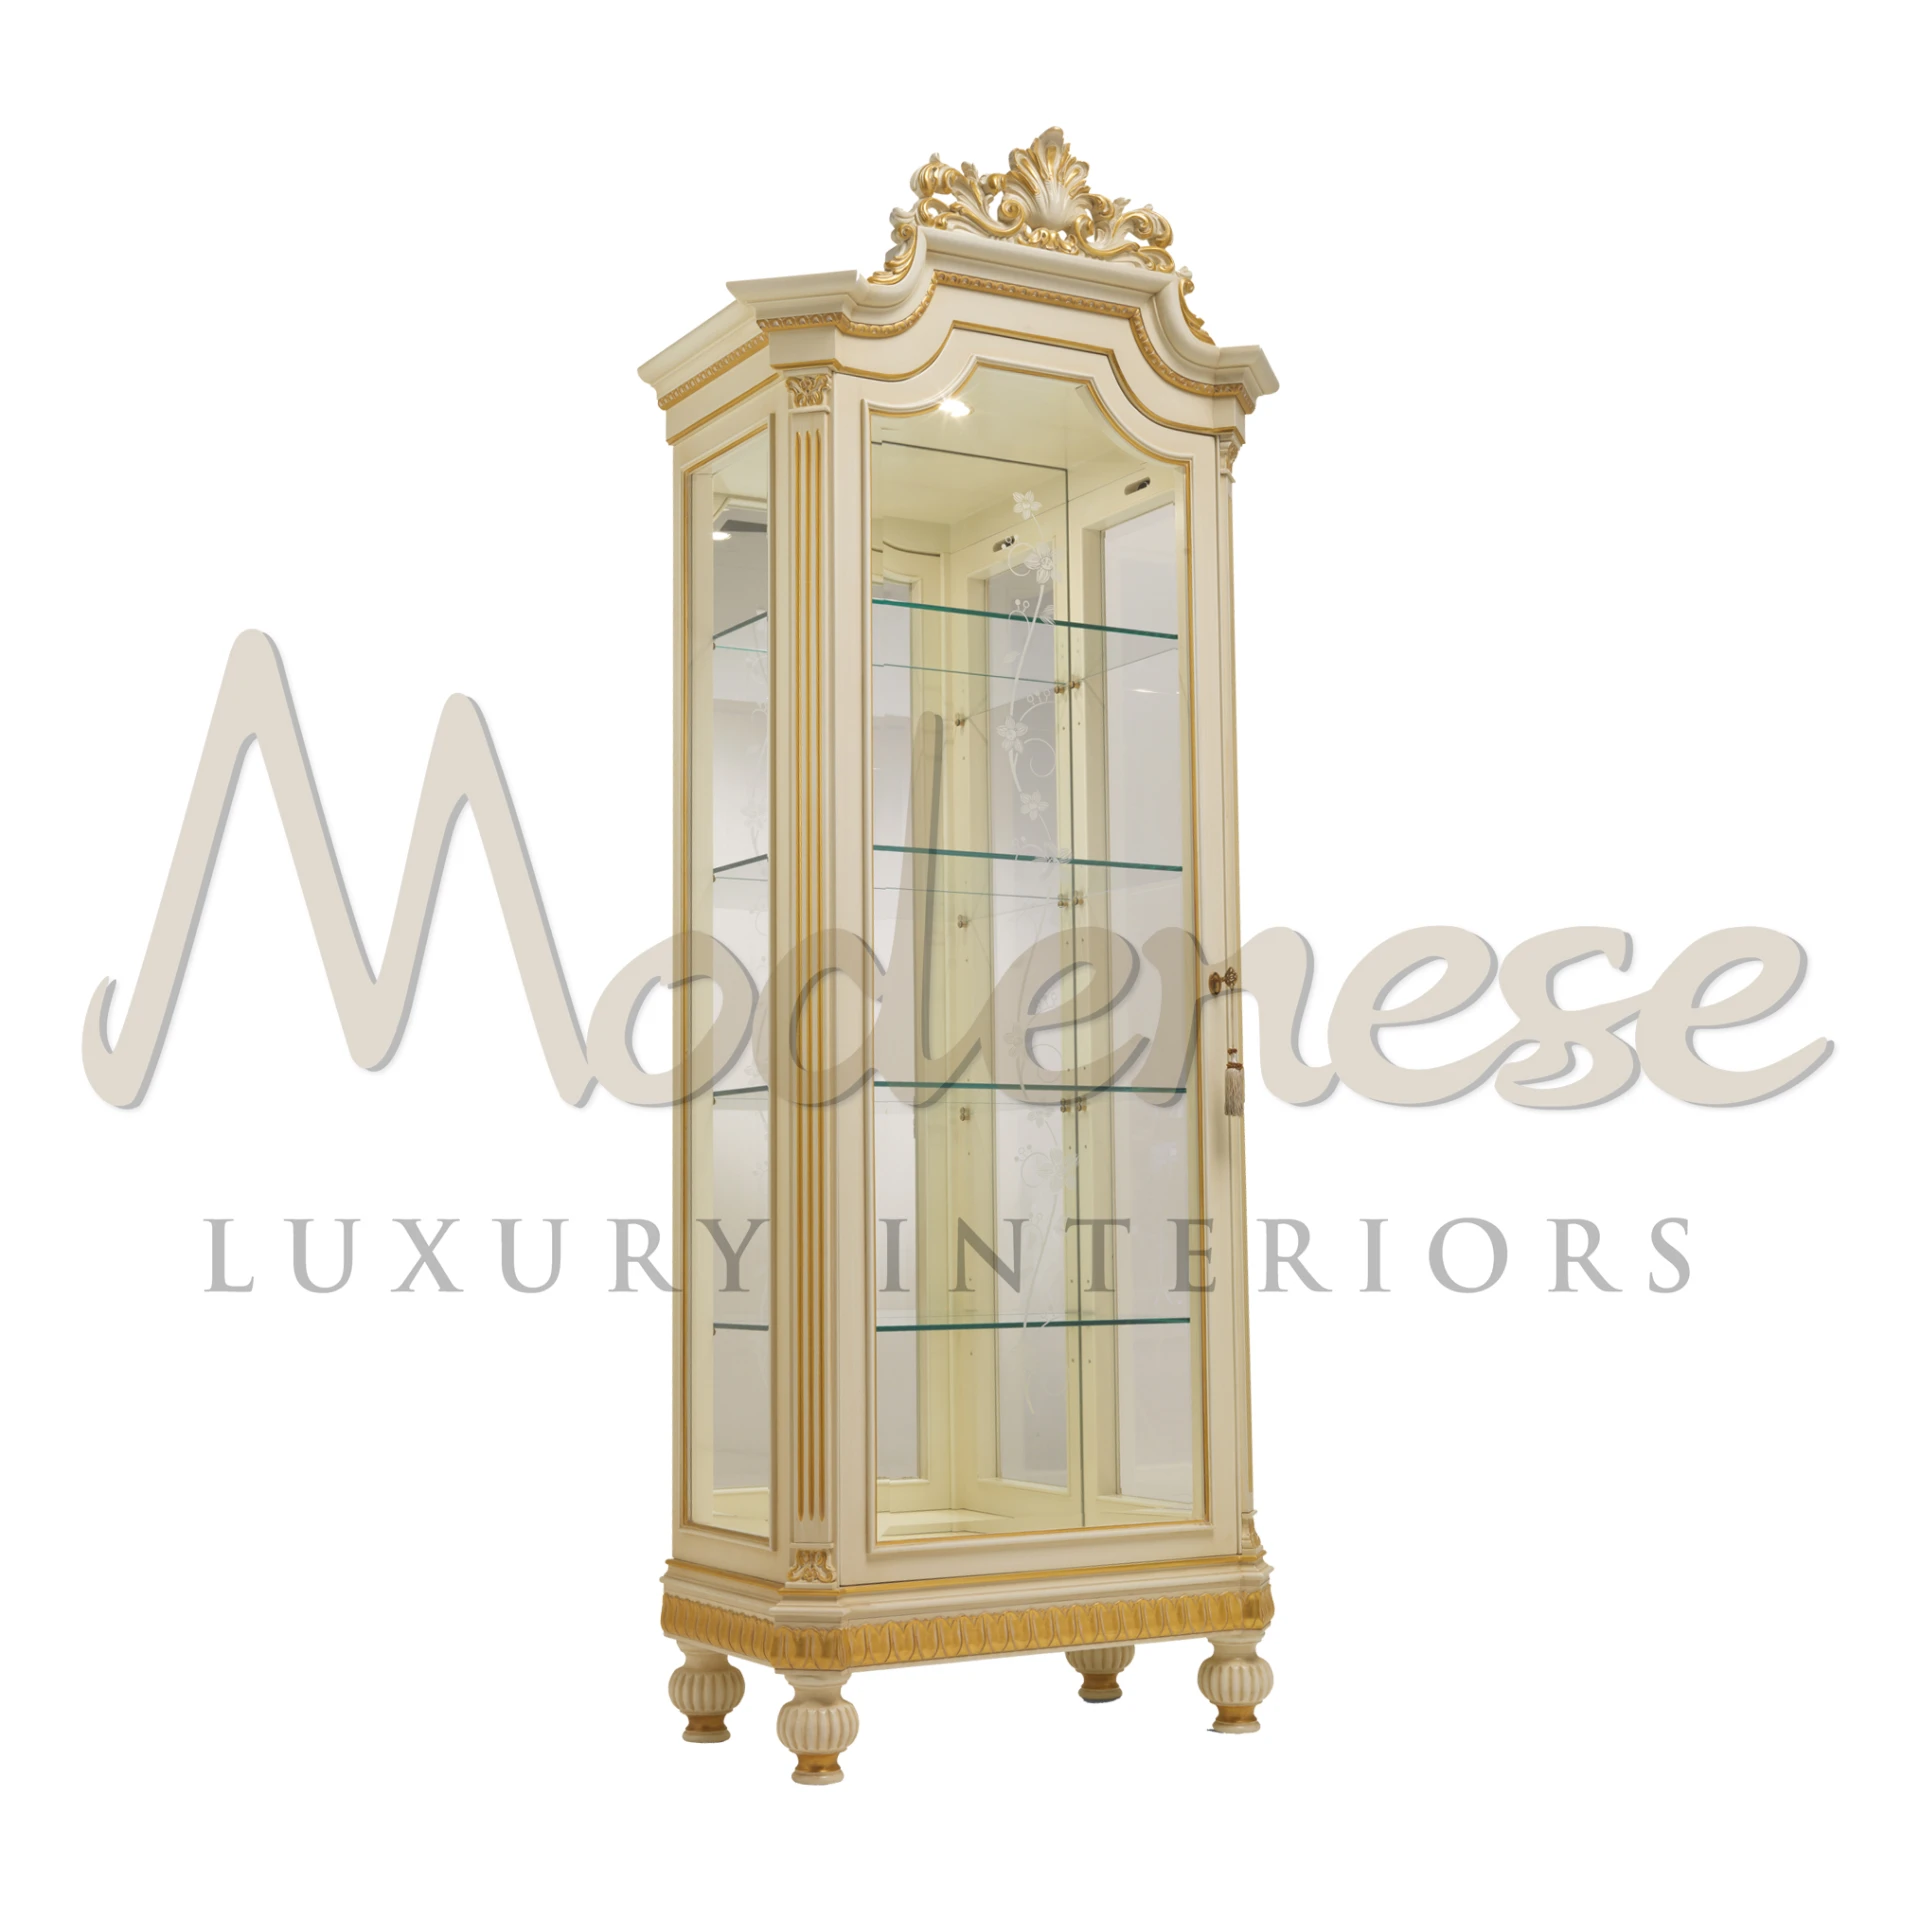 Luxurious ivory style one door cabinet featuring glass shelves and classic design.